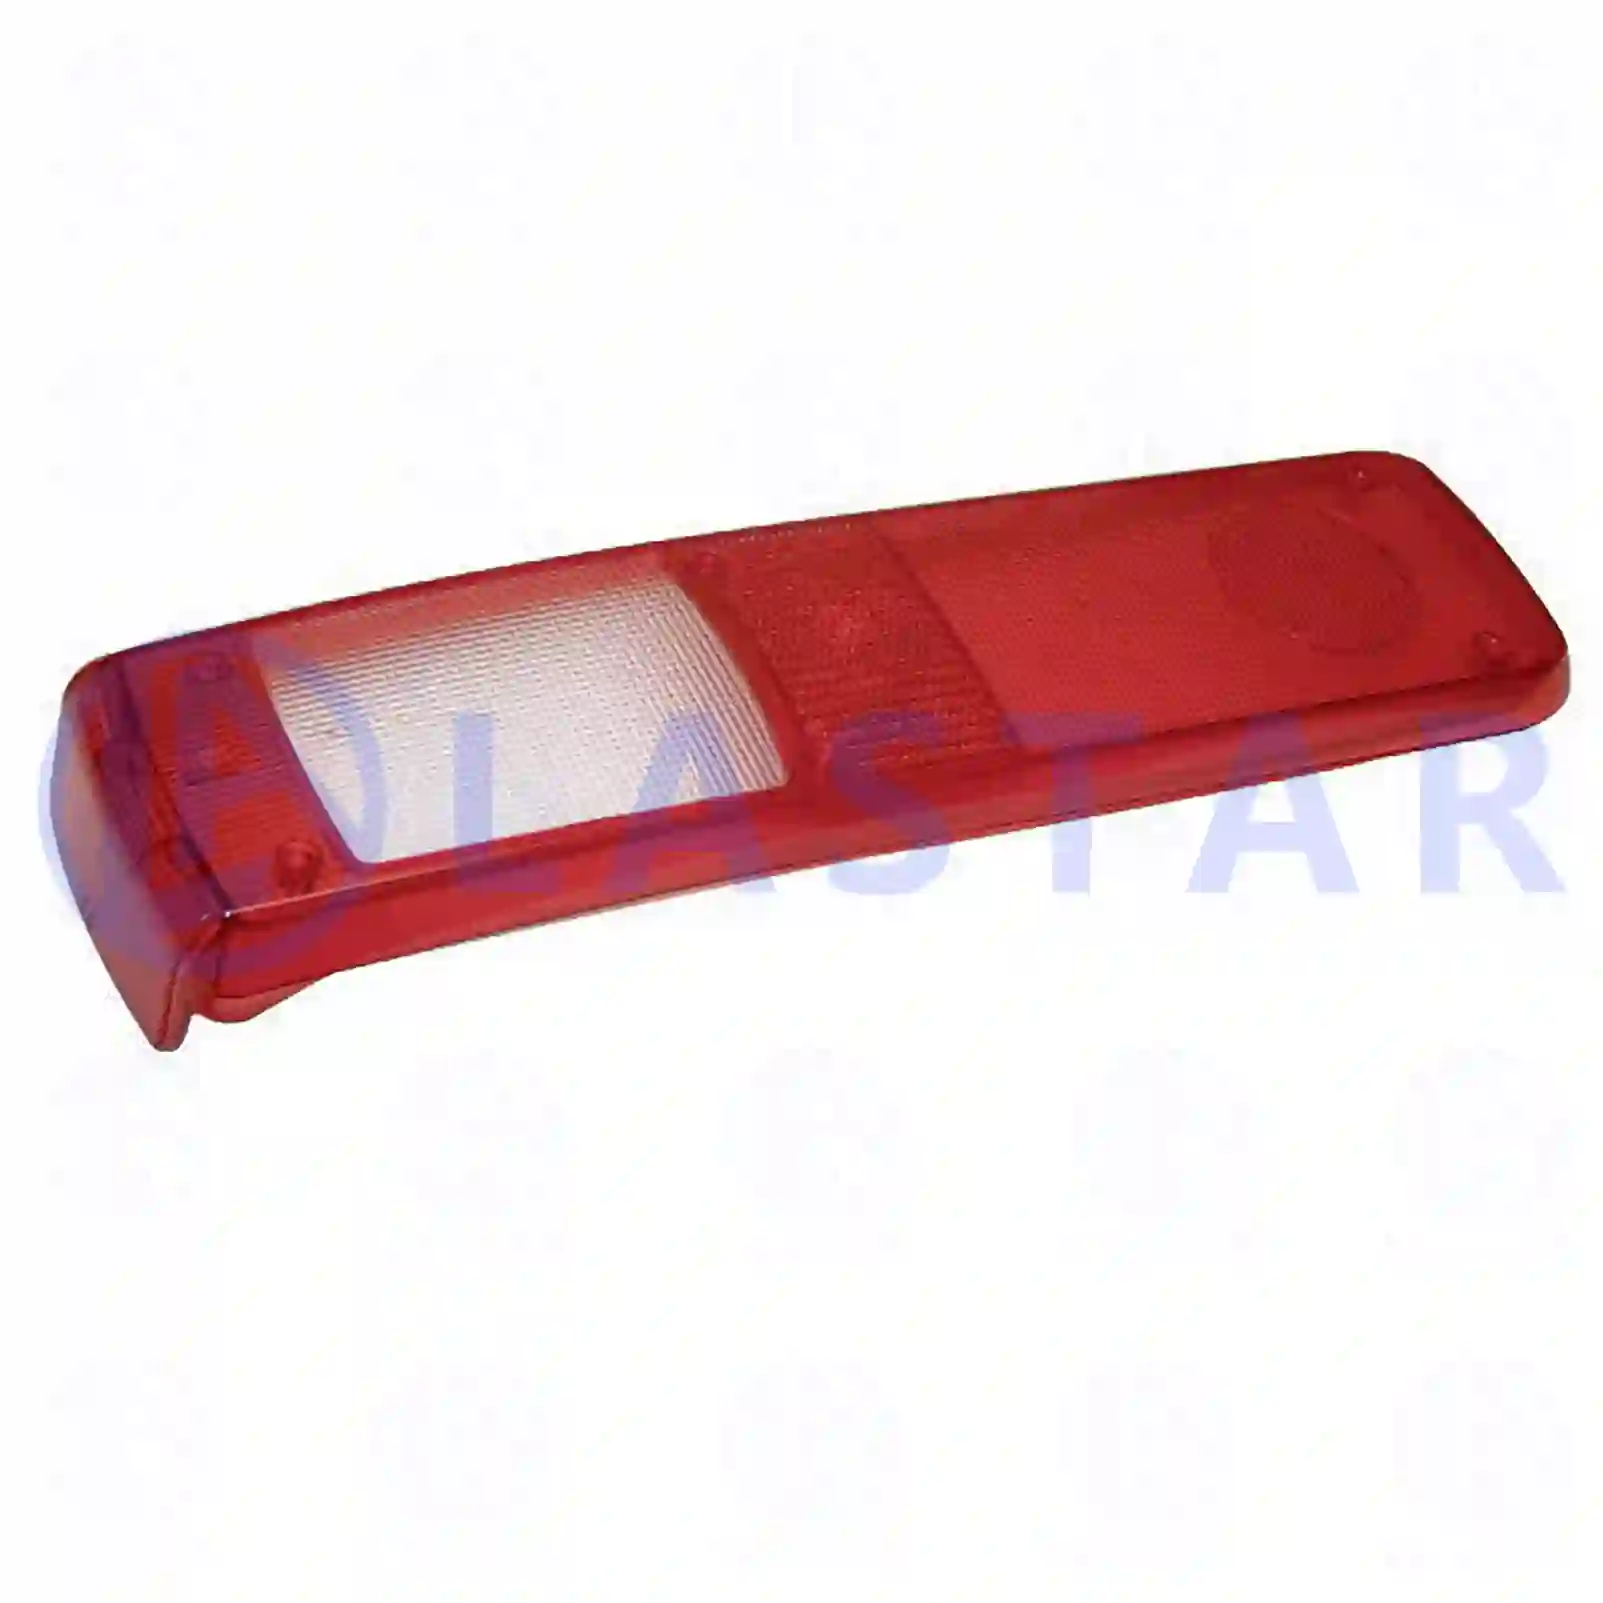 Tail lamp glass, 77711083, 7420802418, 20802418, ZG21077-0008 ||  77711083 Lastar Spare Part | Truck Spare Parts, Auotomotive Spare Parts Tail lamp glass, 77711083, 7420802418, 20802418, ZG21077-0008 ||  77711083 Lastar Spare Part | Truck Spare Parts, Auotomotive Spare Parts